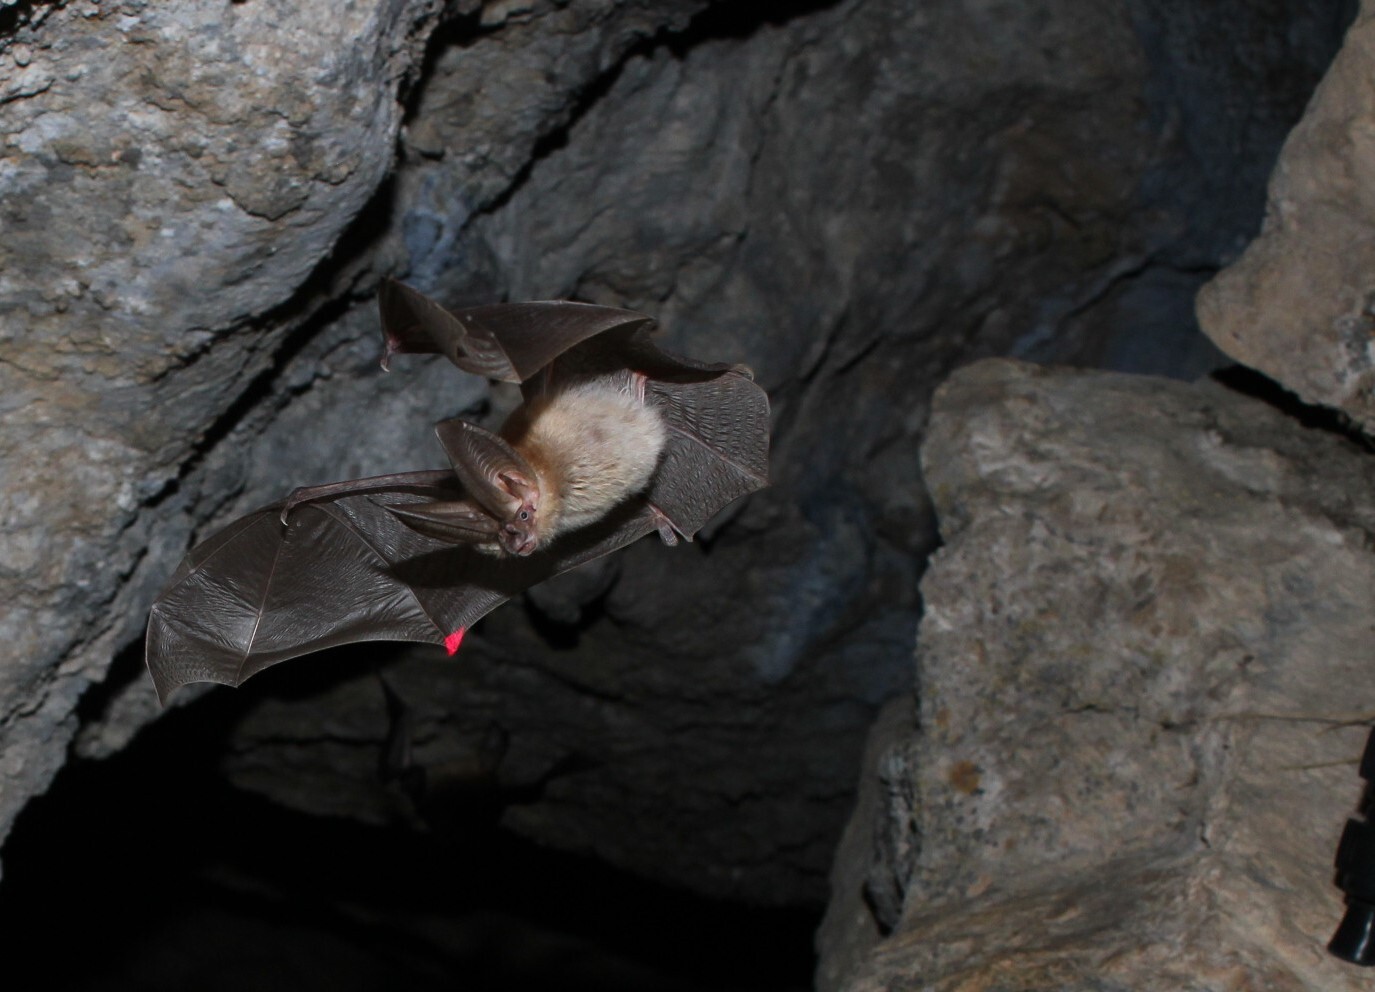 Western big-eared bat emerging from cave in flight with tan fur and wings and tail spread out. Small black eyes.